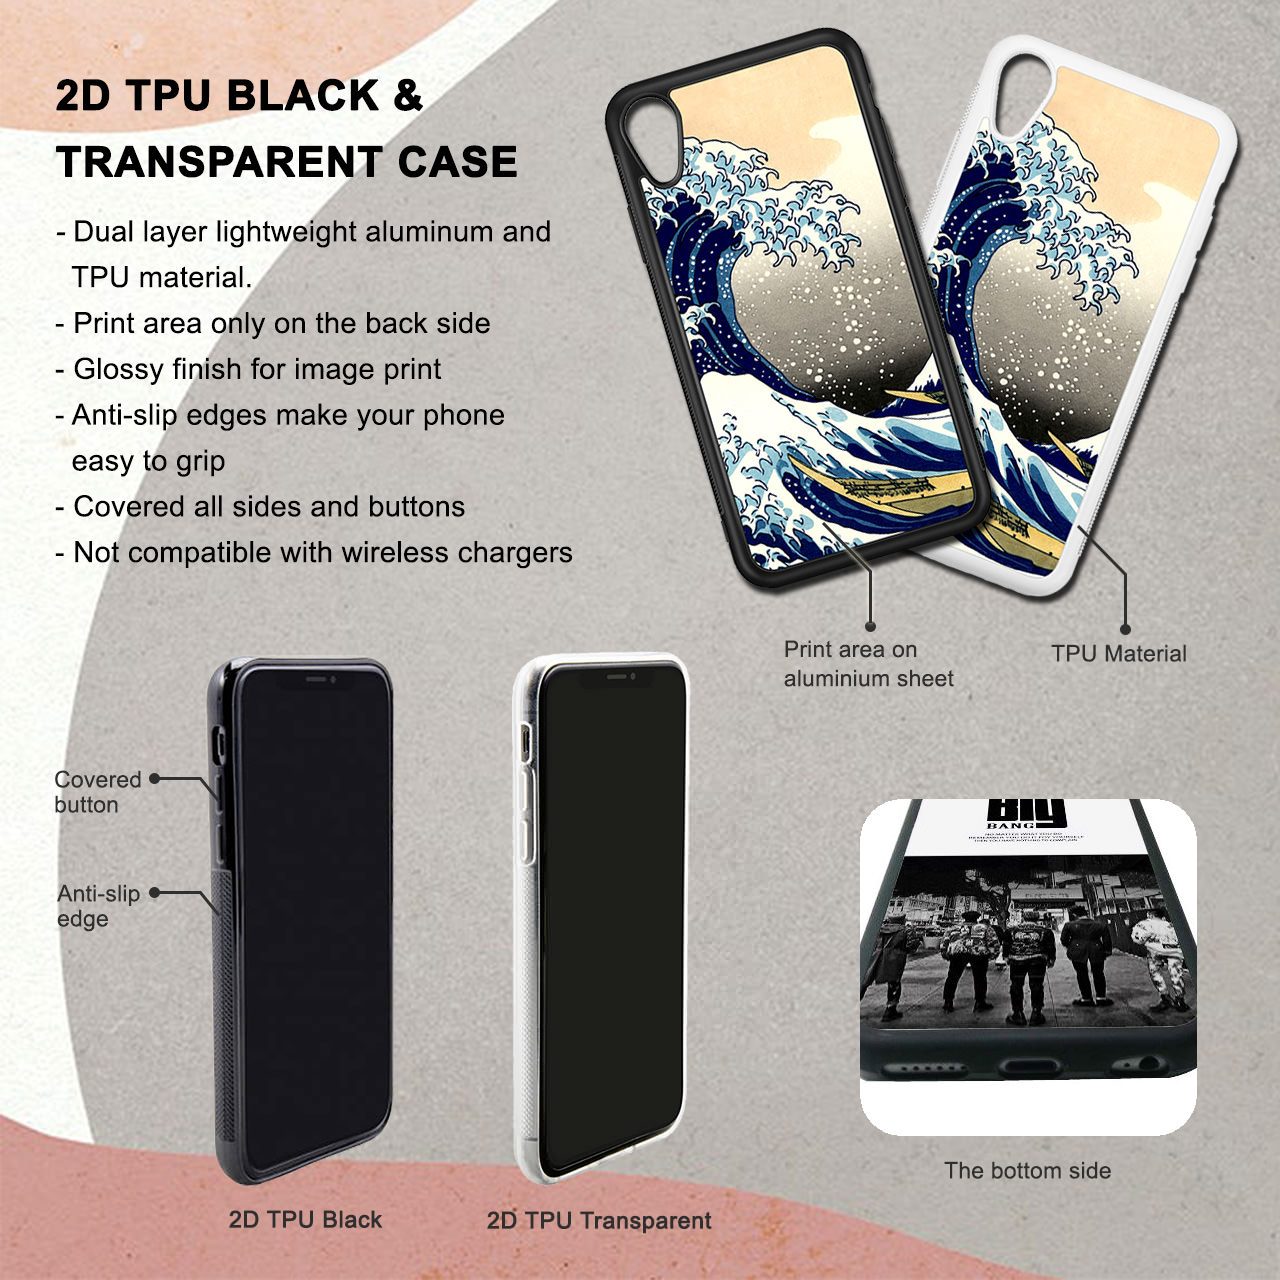 Muse iPhone 6/6S Case